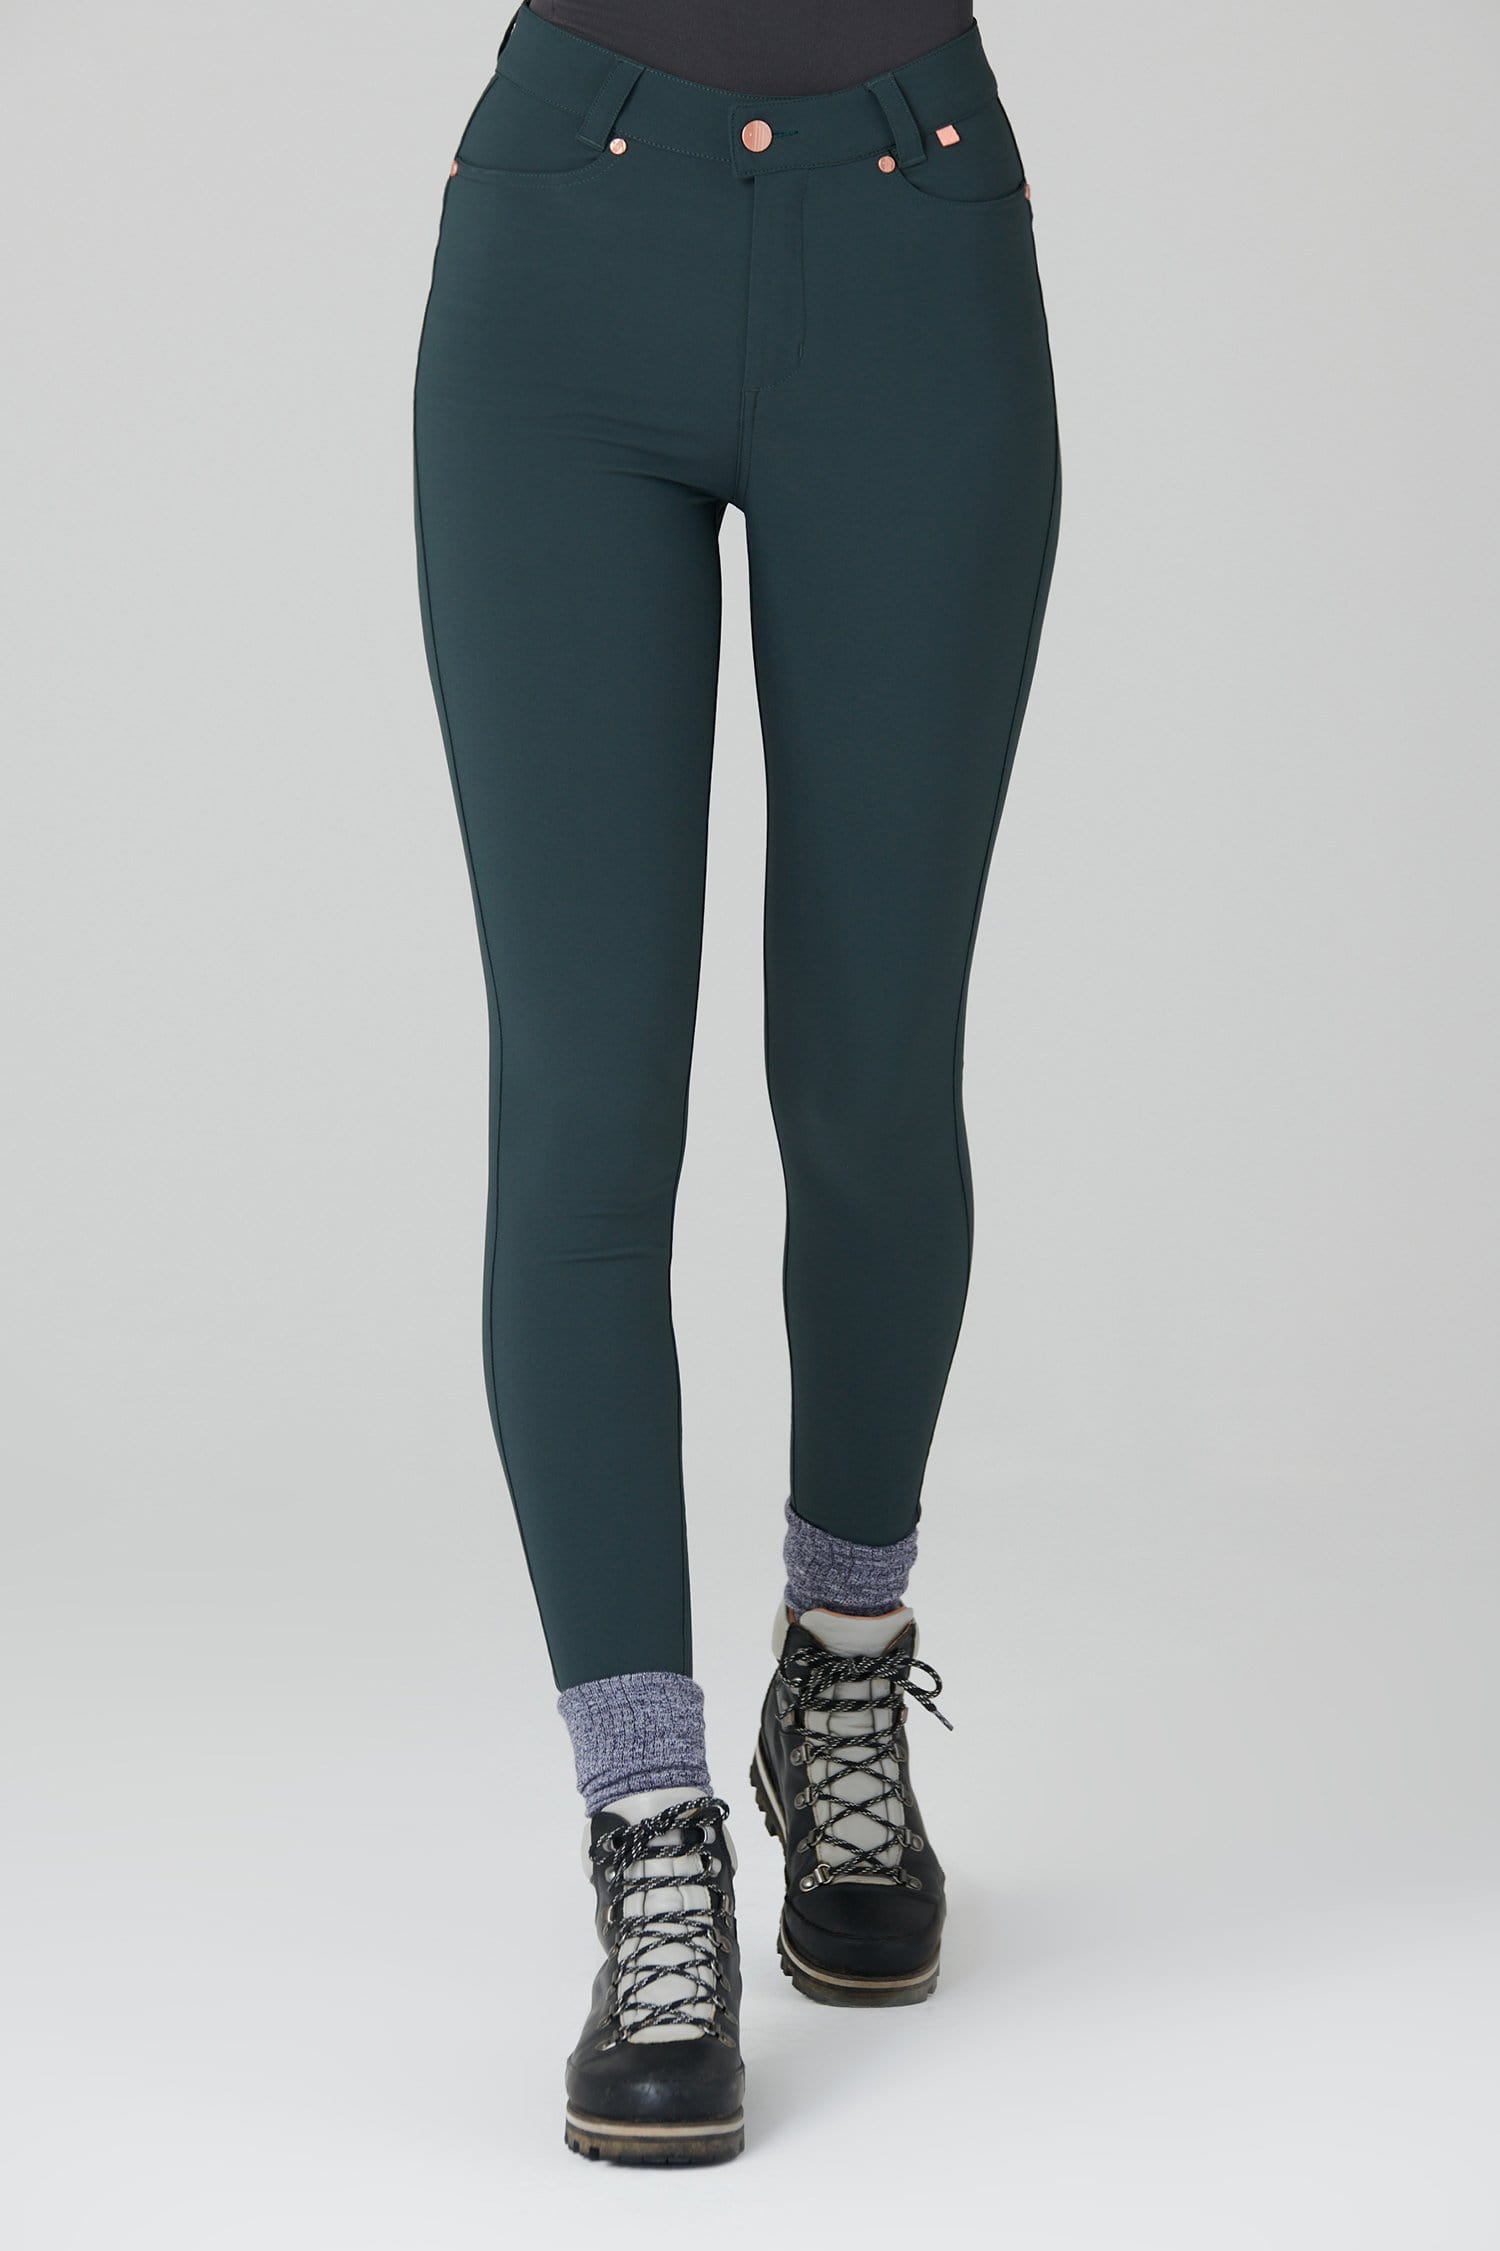 Thermal Skinny Outdoor Trousers - Forest Green - 24r / Uk6 - Womens - Acai Outdoorwear